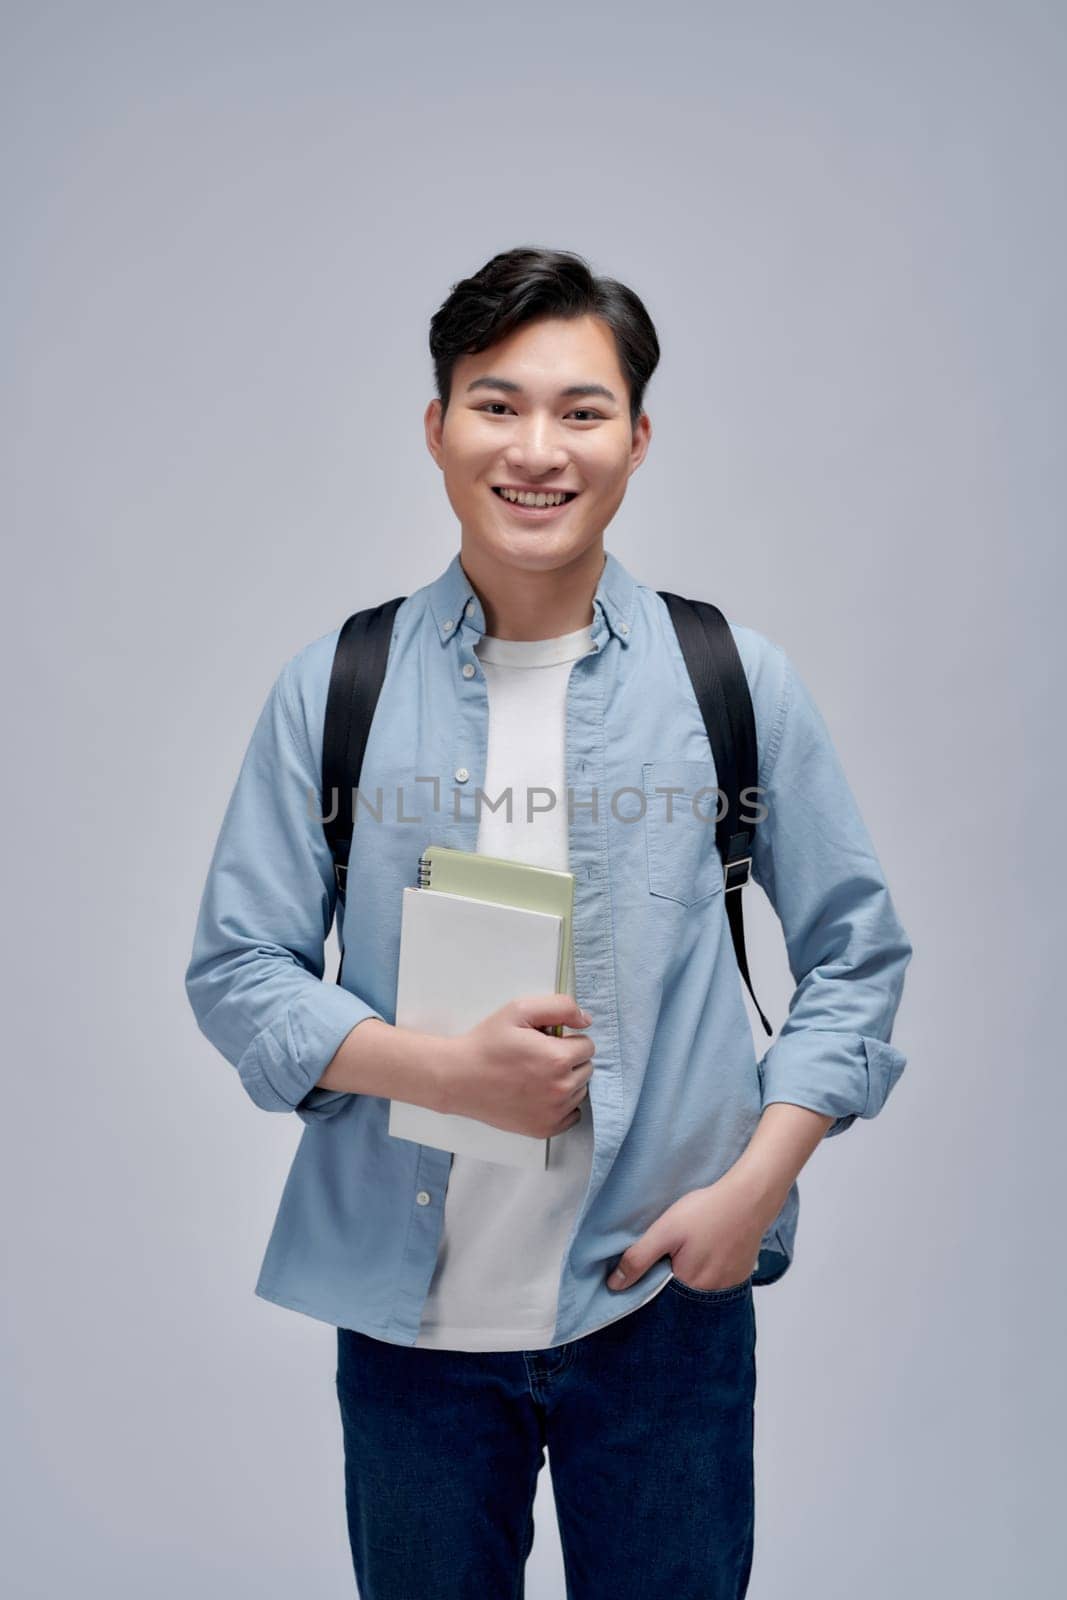 Image of content student guy in denim clothes smiling while holding exercise books